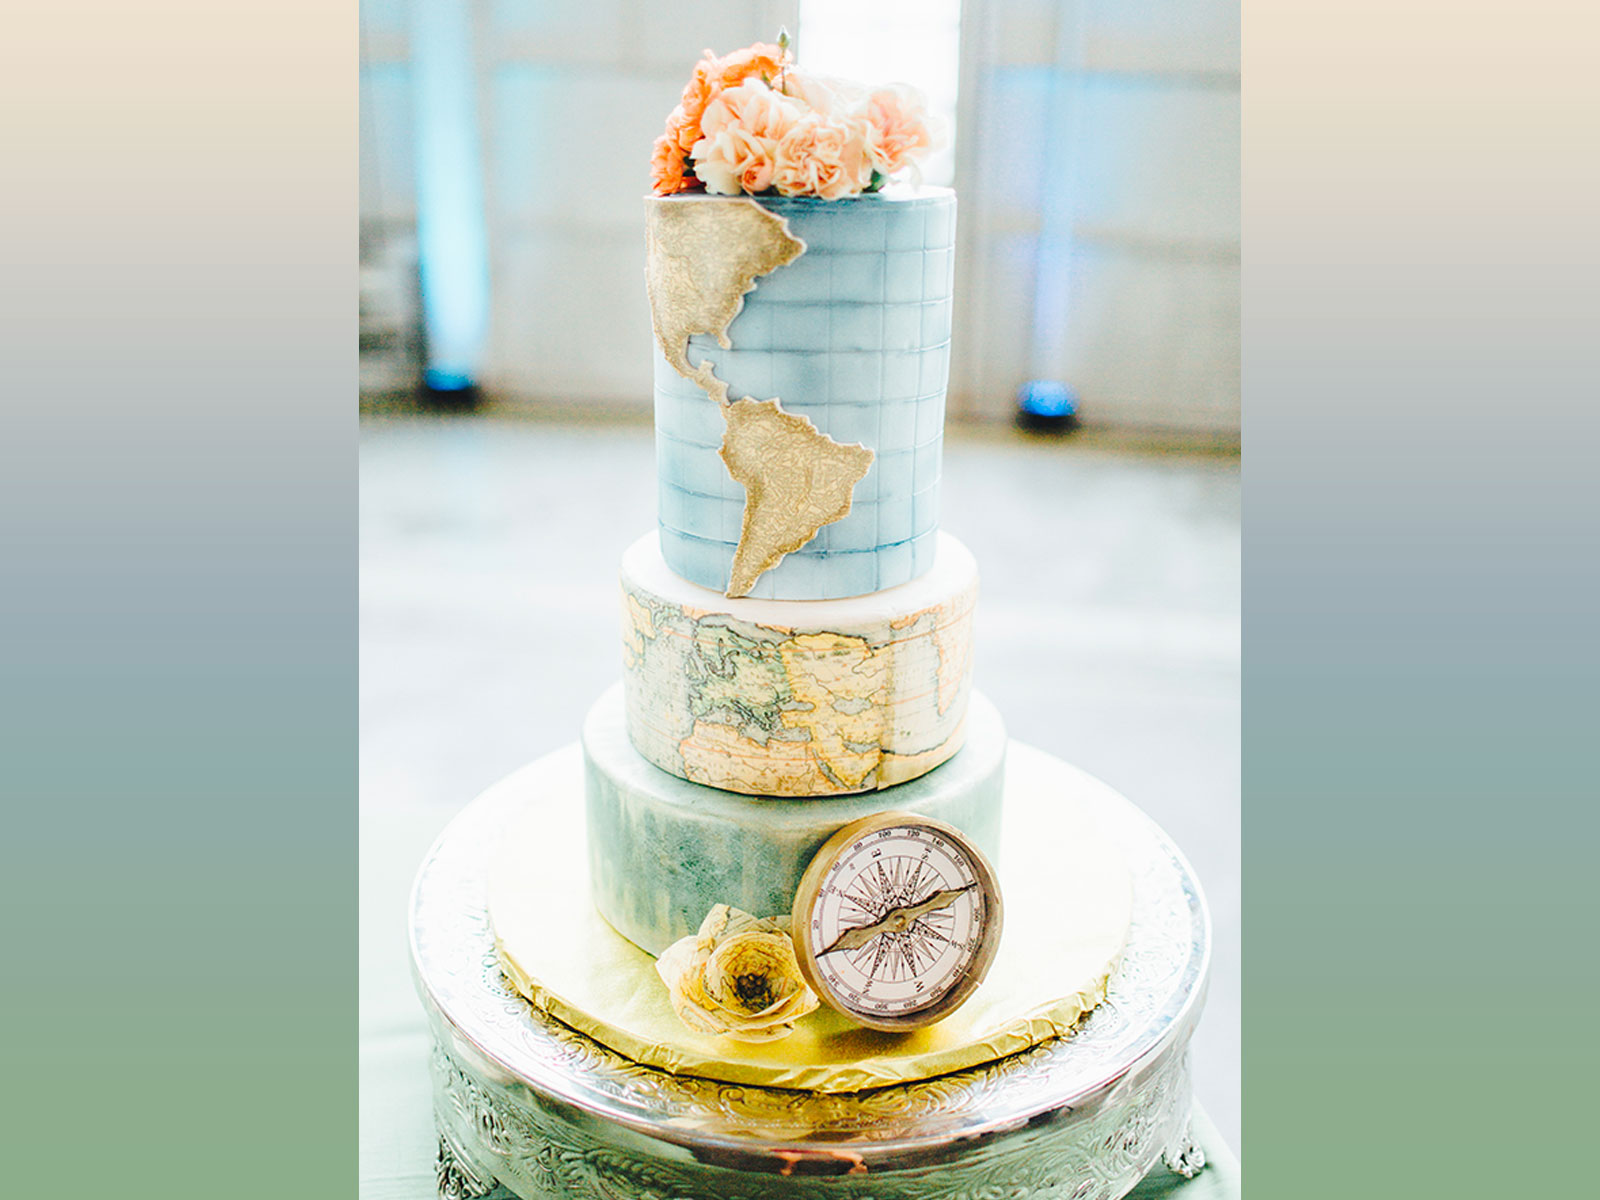 Rate These Wedding Cakes and We’ll Reveal What Your Next Boyfriend Will Be Like 1019